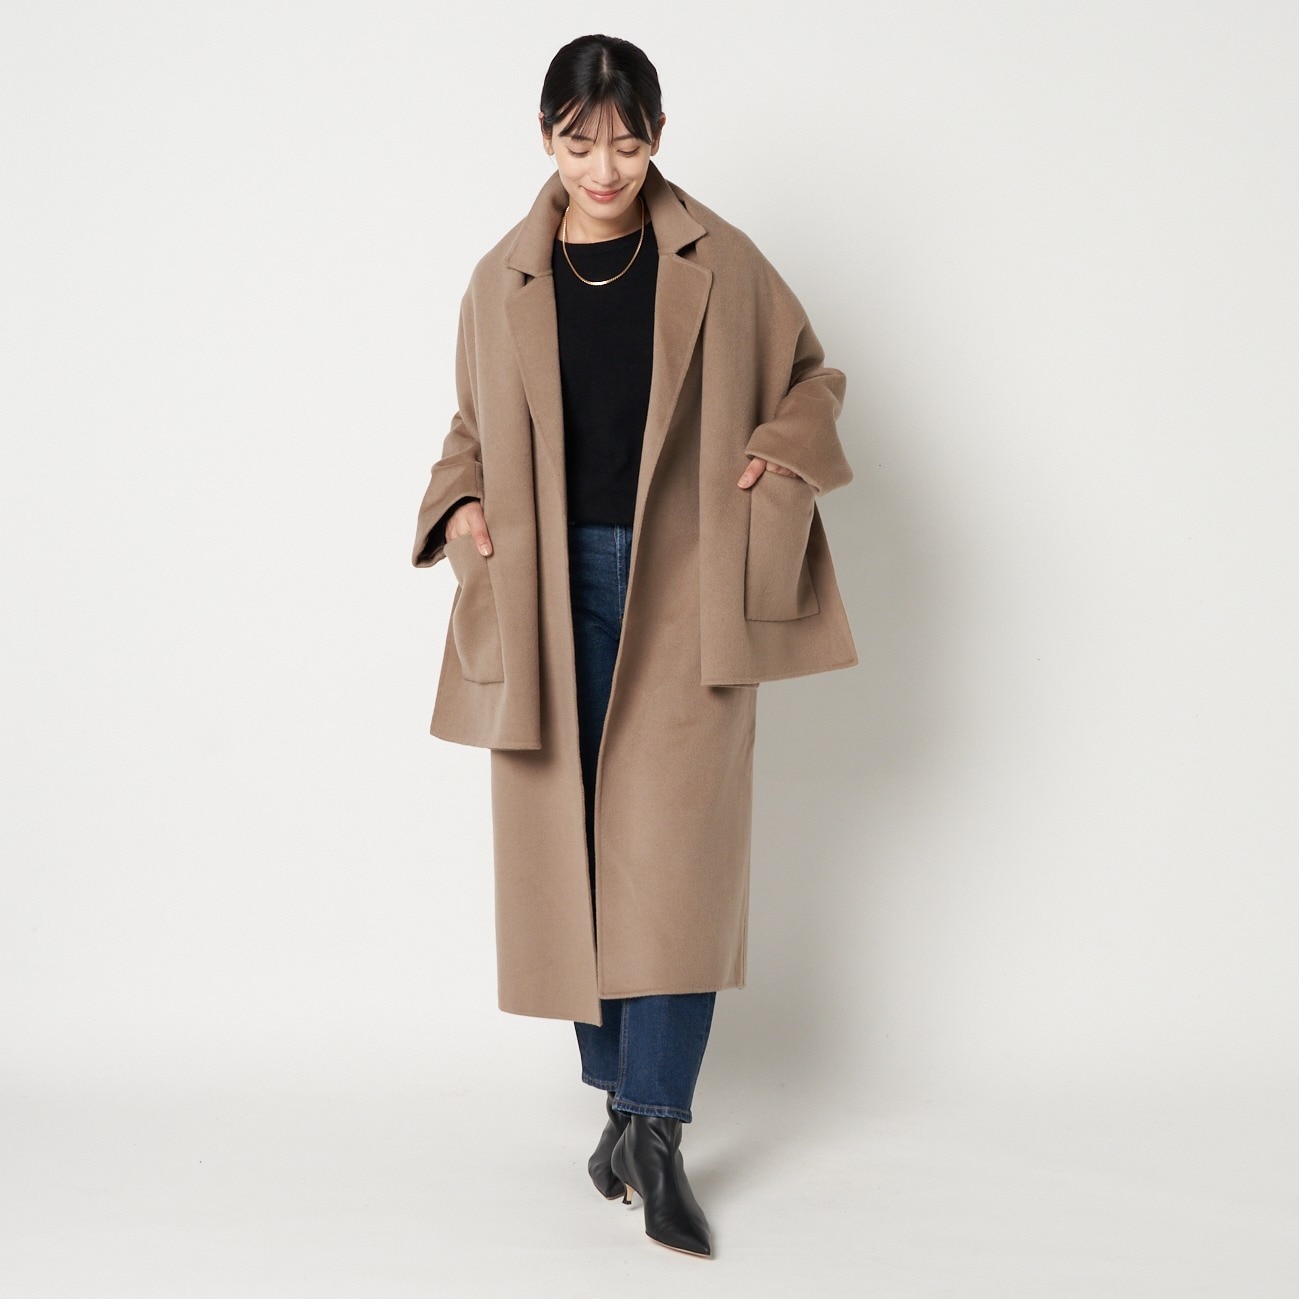 HELIOPOLE DOUBLE FACE COAT WITH STOLE|HELIOPOLE(エリオポール)の 